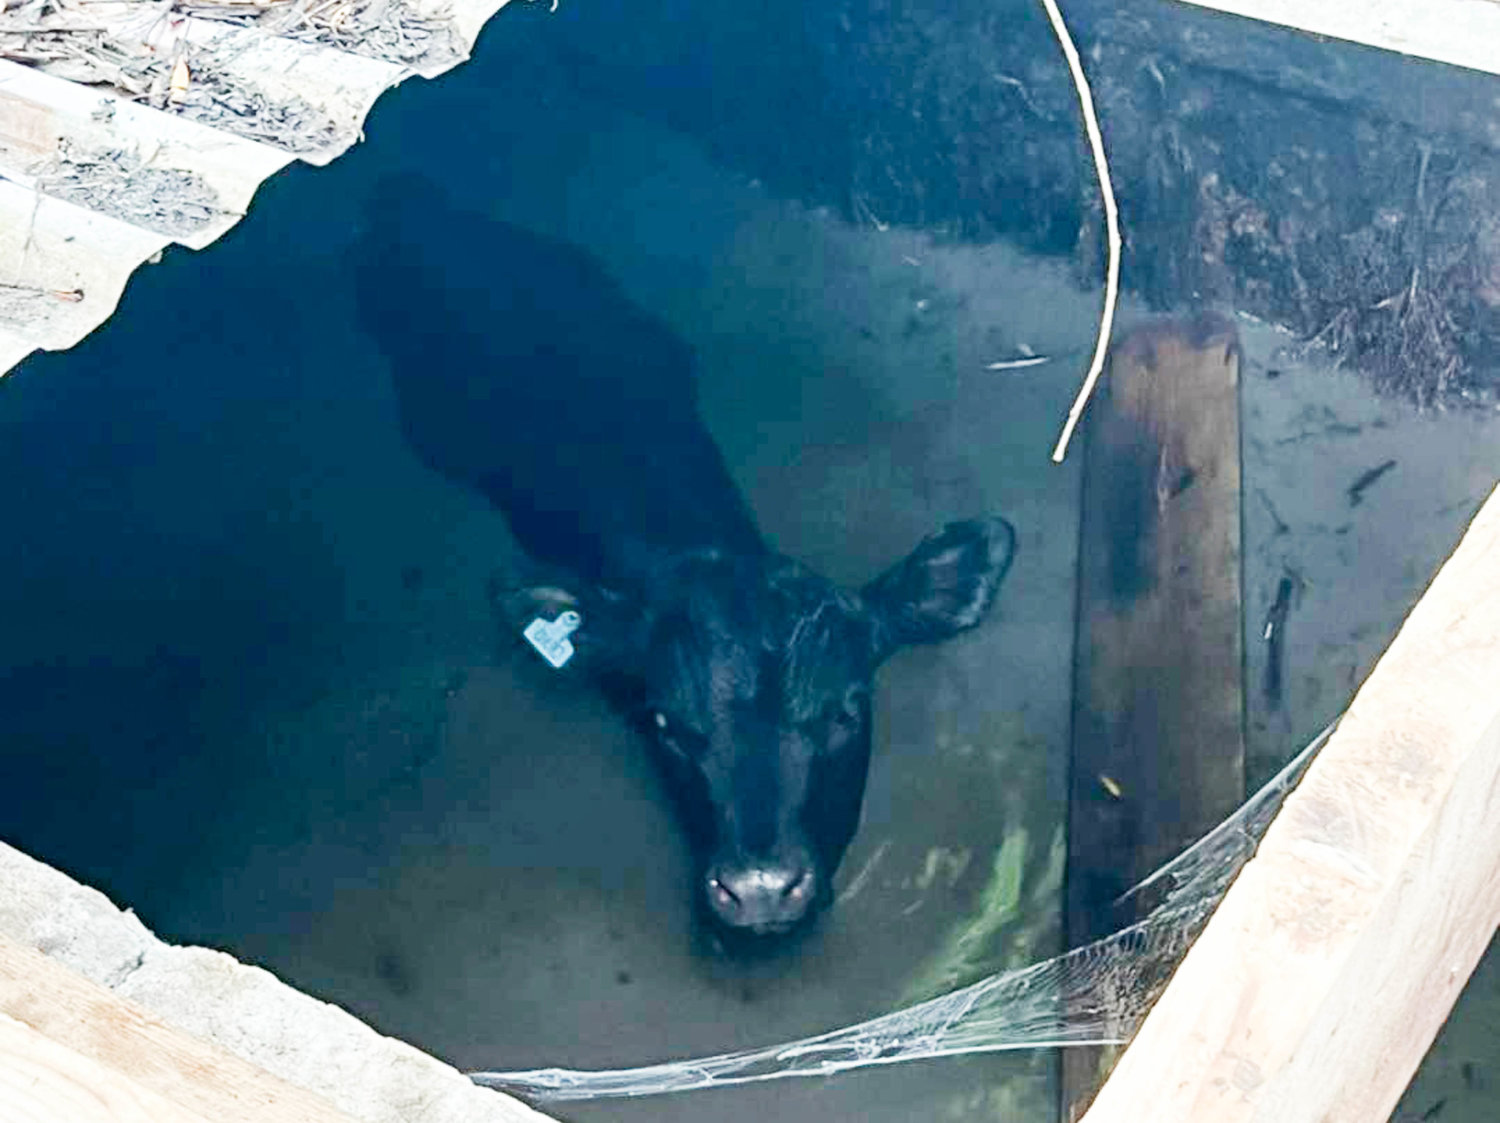 A young calf keeps its head above water after accidentally falling into a spring box on a farm in Western Saturday morning. The Western Fire Department responded and pulled the animal out without injury.